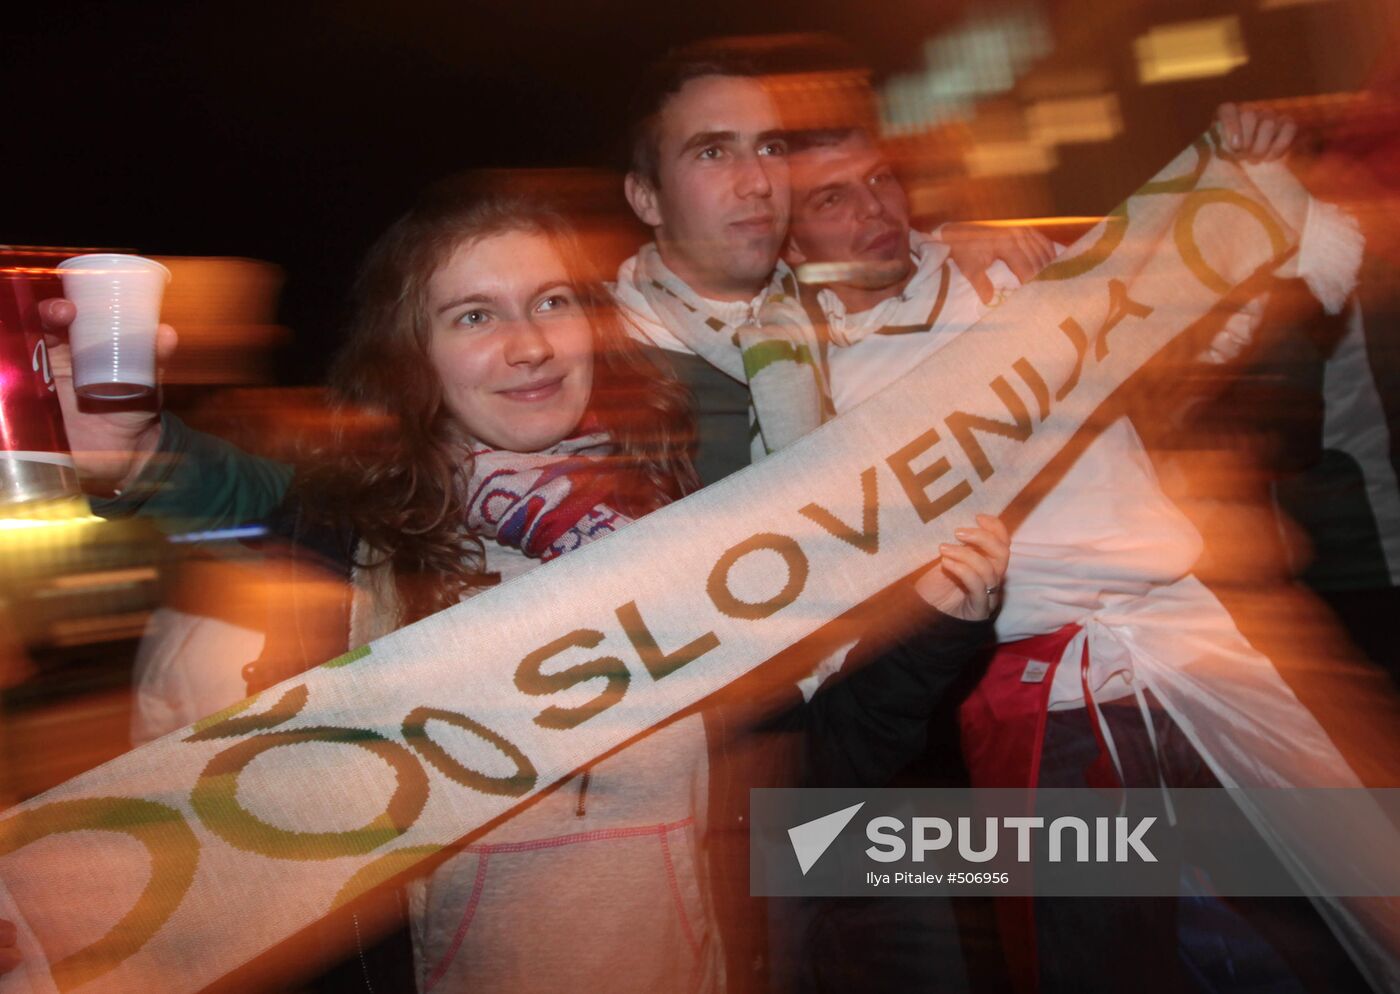 Football fans to attend Slovenia vs. Russia World Cup qualifier